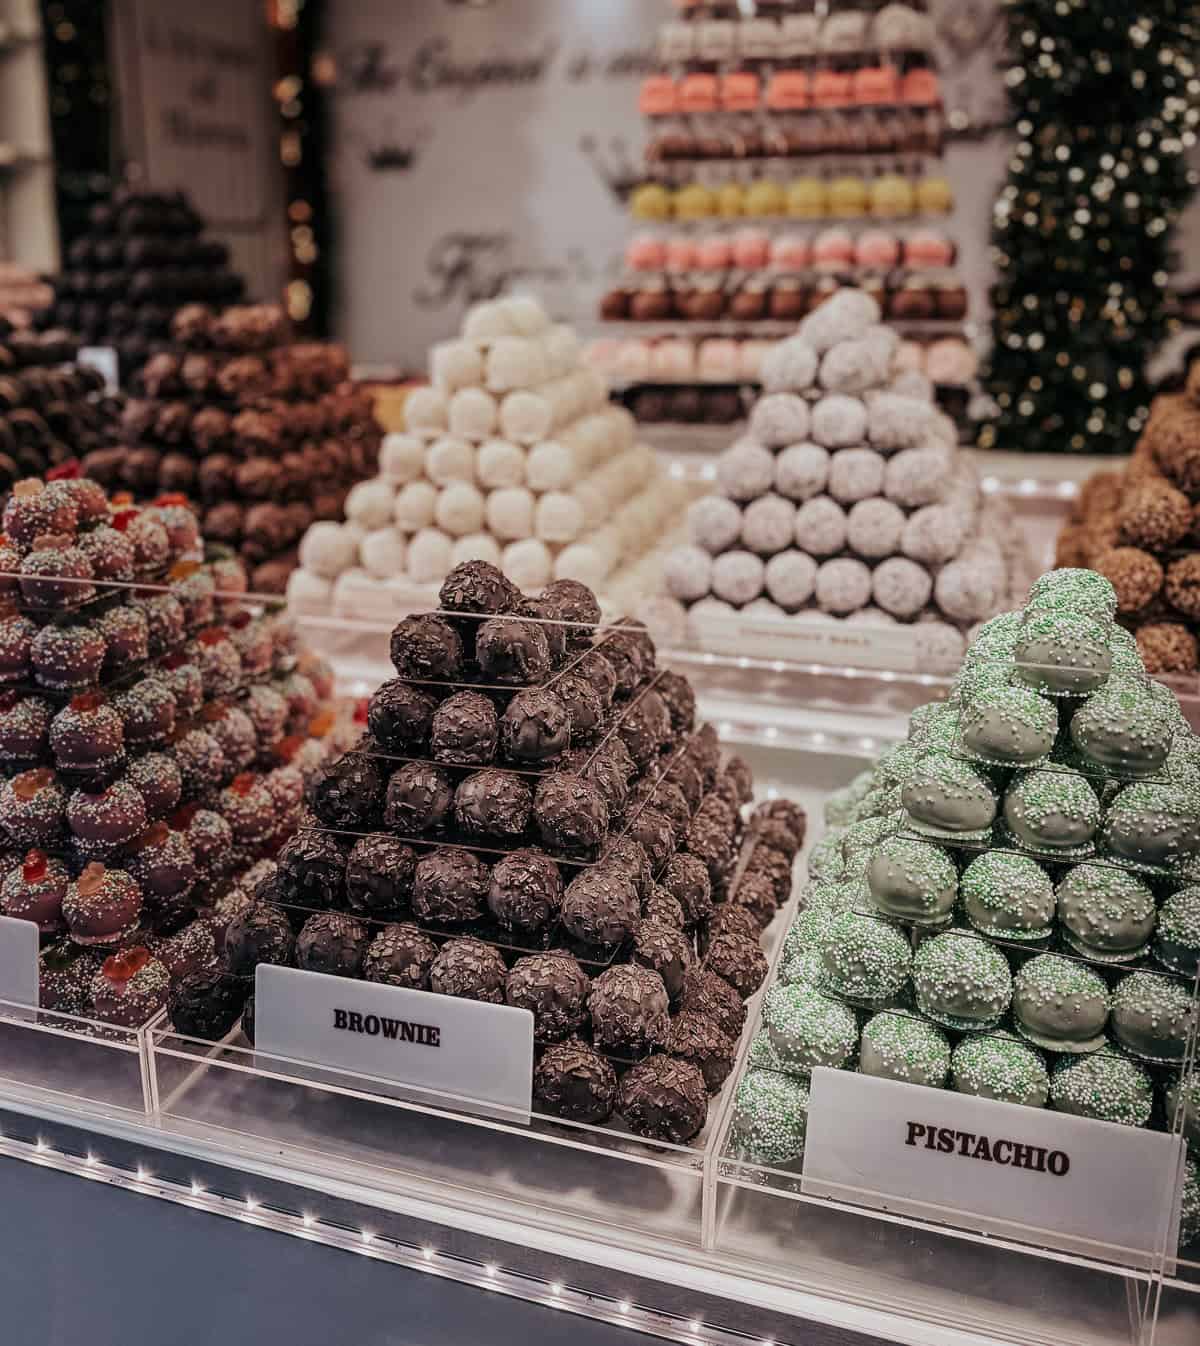 An enticing display of marzipan sweets arranged in pyramid shapes with various flavors like Brownie and Pistachio, each labeled and showcased against a backdrop of colorful macarons and a Christmas tree.